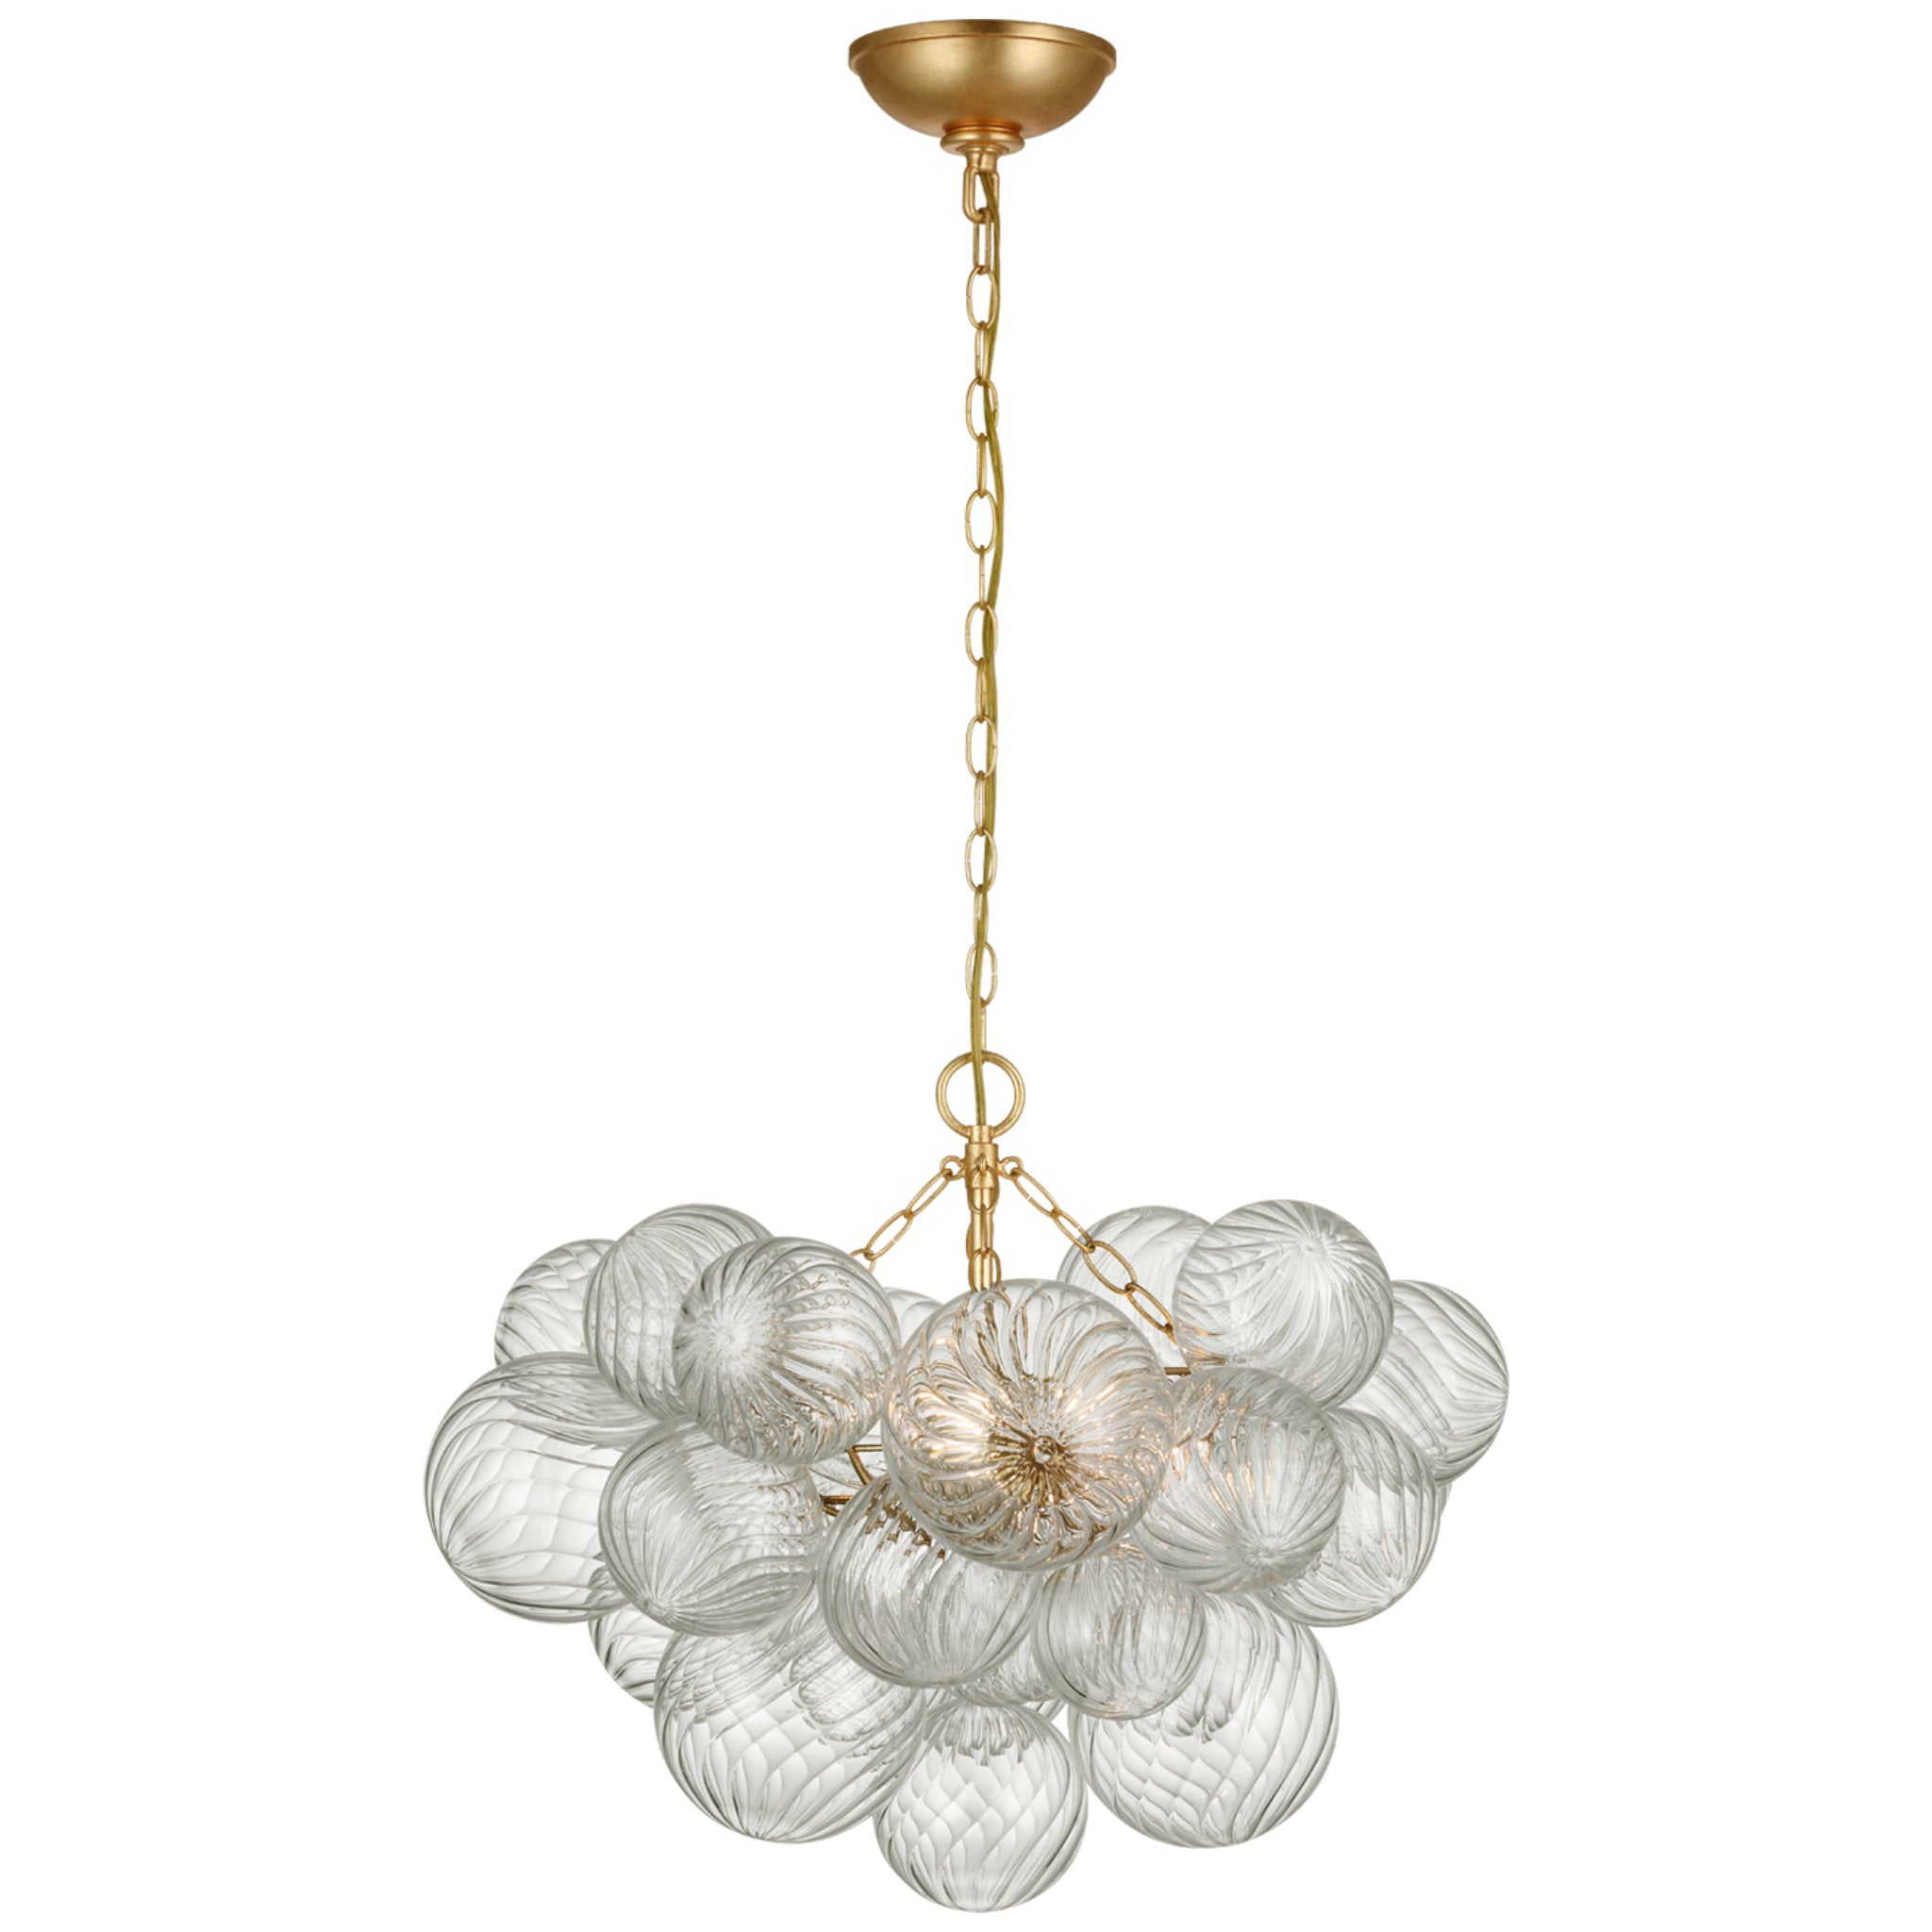 Julie Neill Talia Small Chandelier in Gild and Clear Swirled Glass